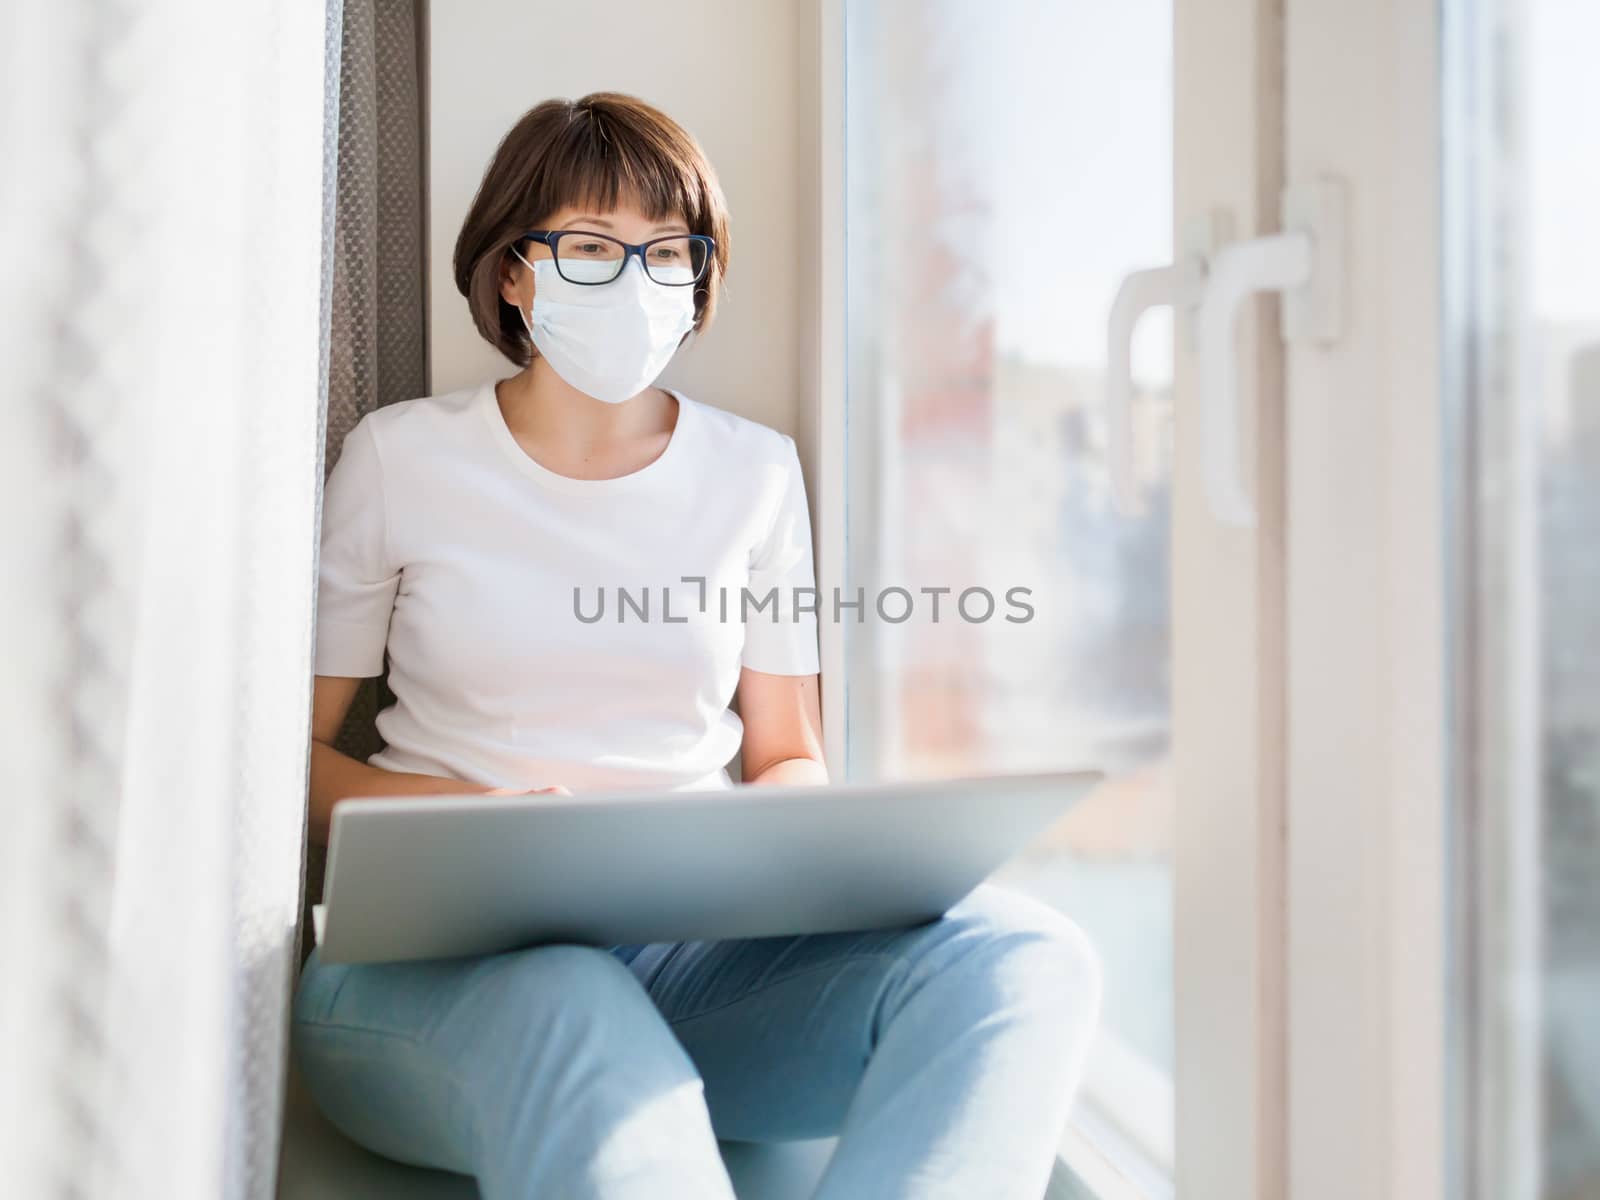 Pretty woman in medical mask works remotely from home. She sits on window sill with laptop on knees. Lockdown quarantine because of coronavirus COVID19. Self isolation at home.